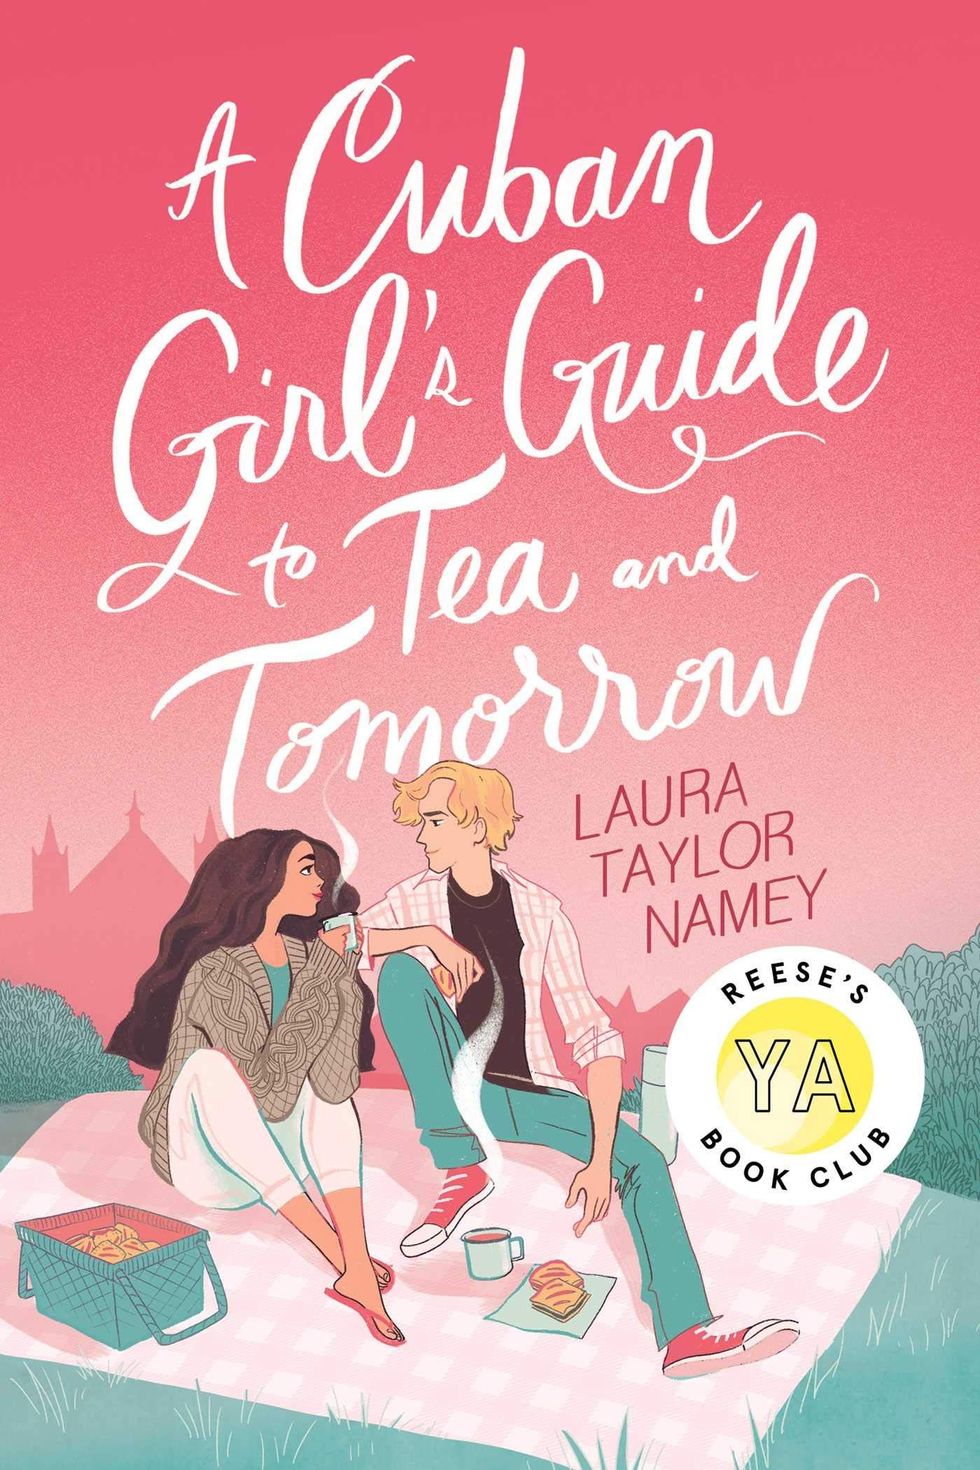 <i>A Cuban Girl’s Guide to Tea and Tomorrow</i>, by Laura Taylor Namey